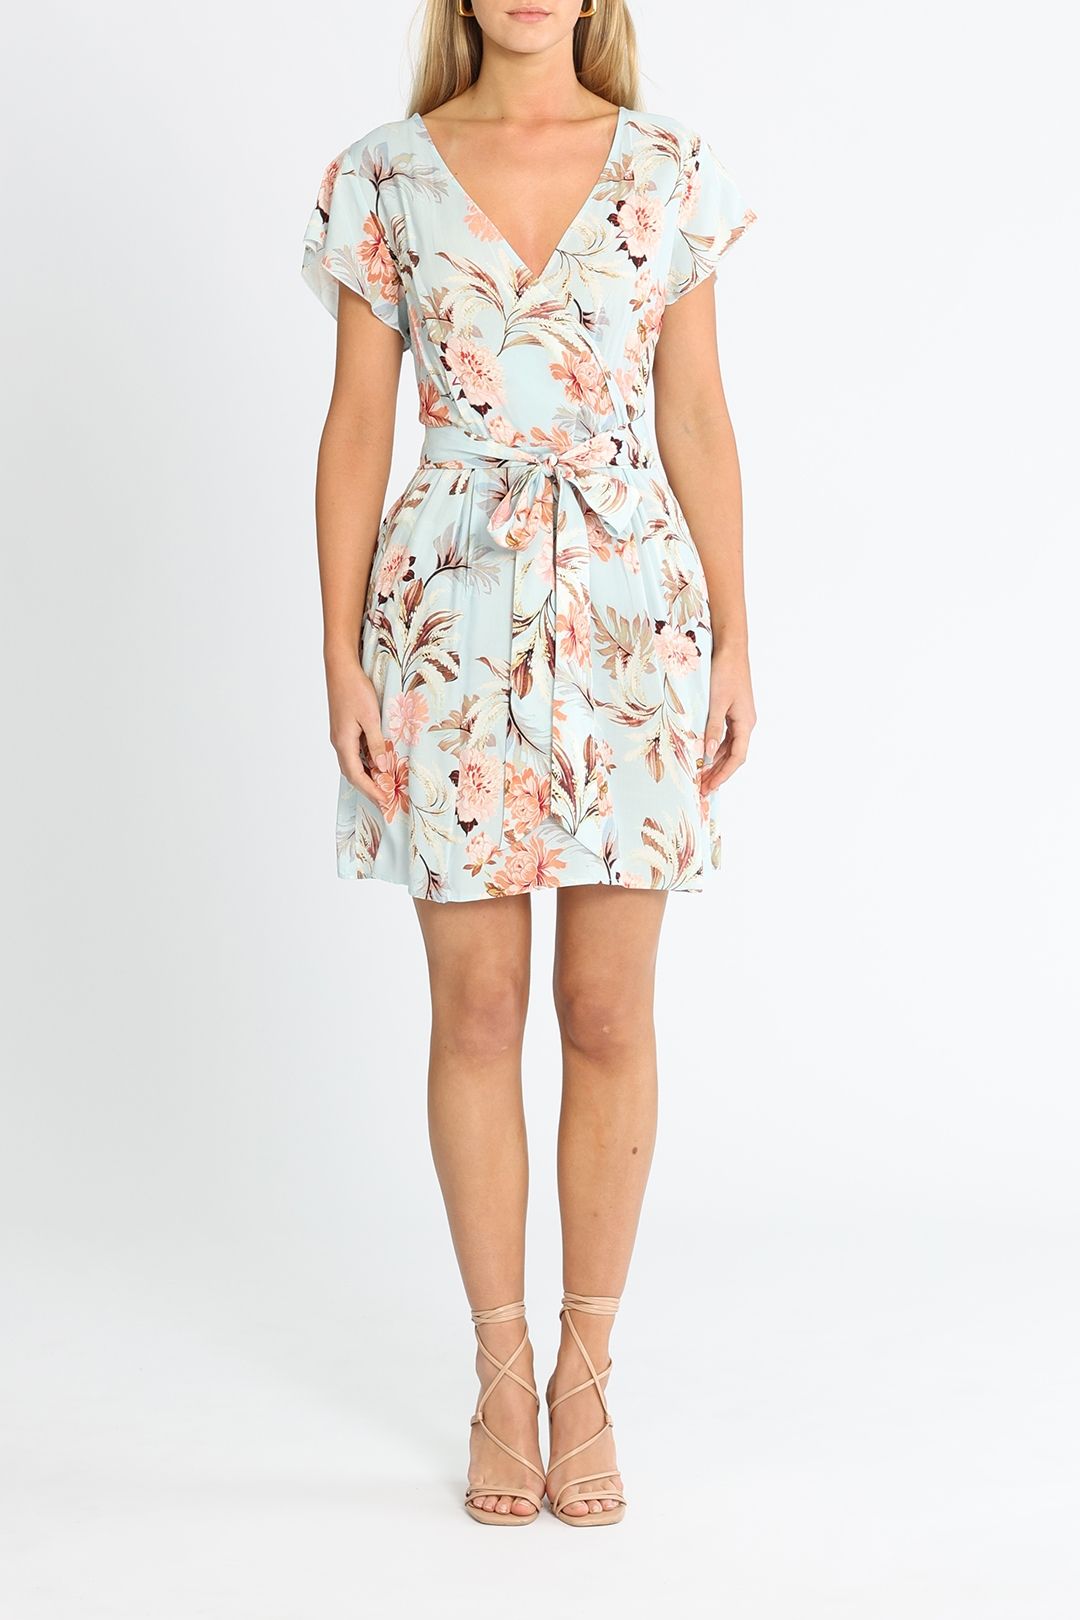 Belle and Bloom I'm The Star Wrap Dress